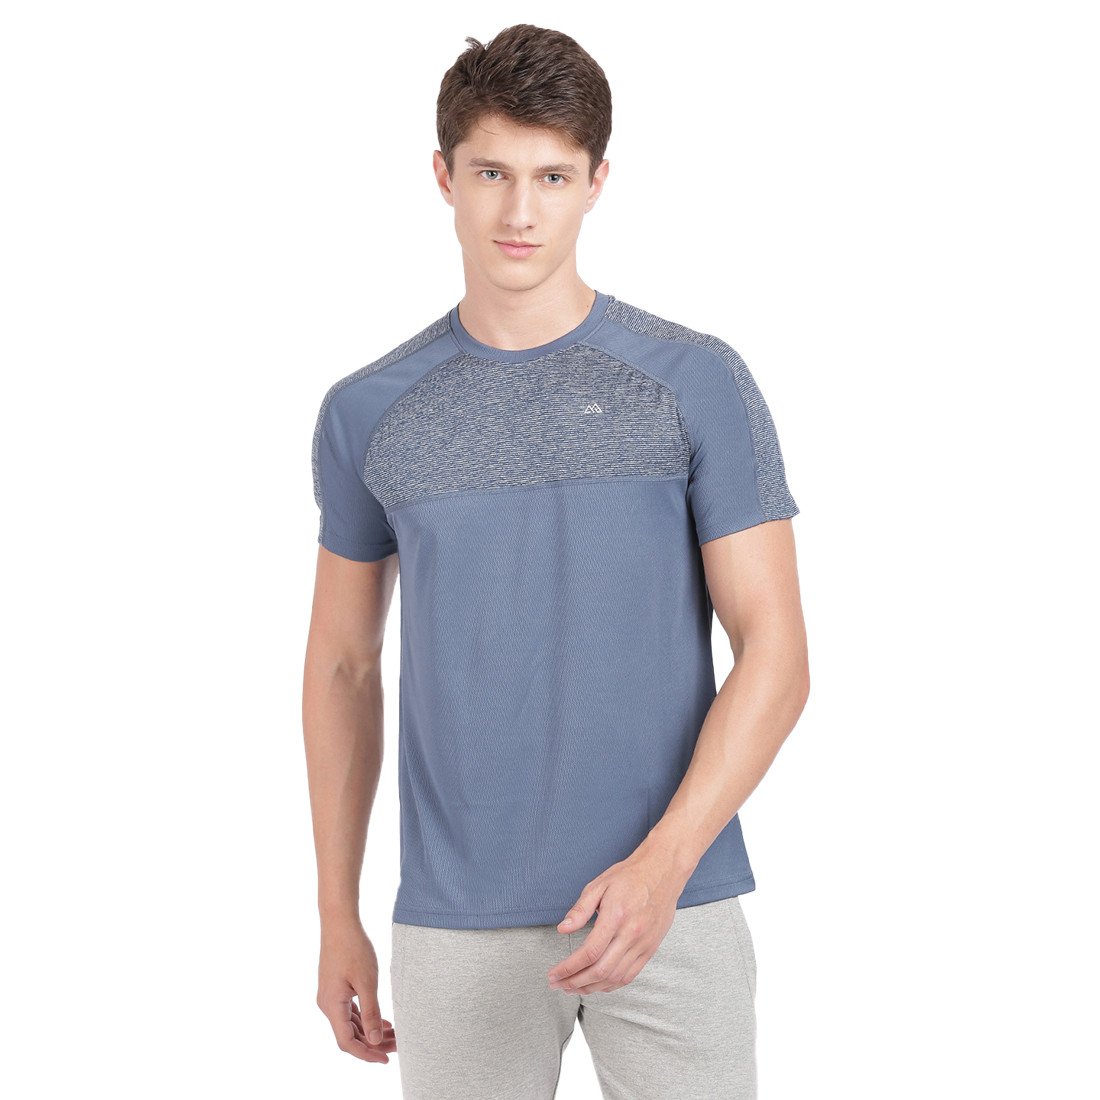 Bleualps Active Mens Round Neck T Shirt With Stripes N Cut Panels | Sports T-Shirt | Workout T-Shirt